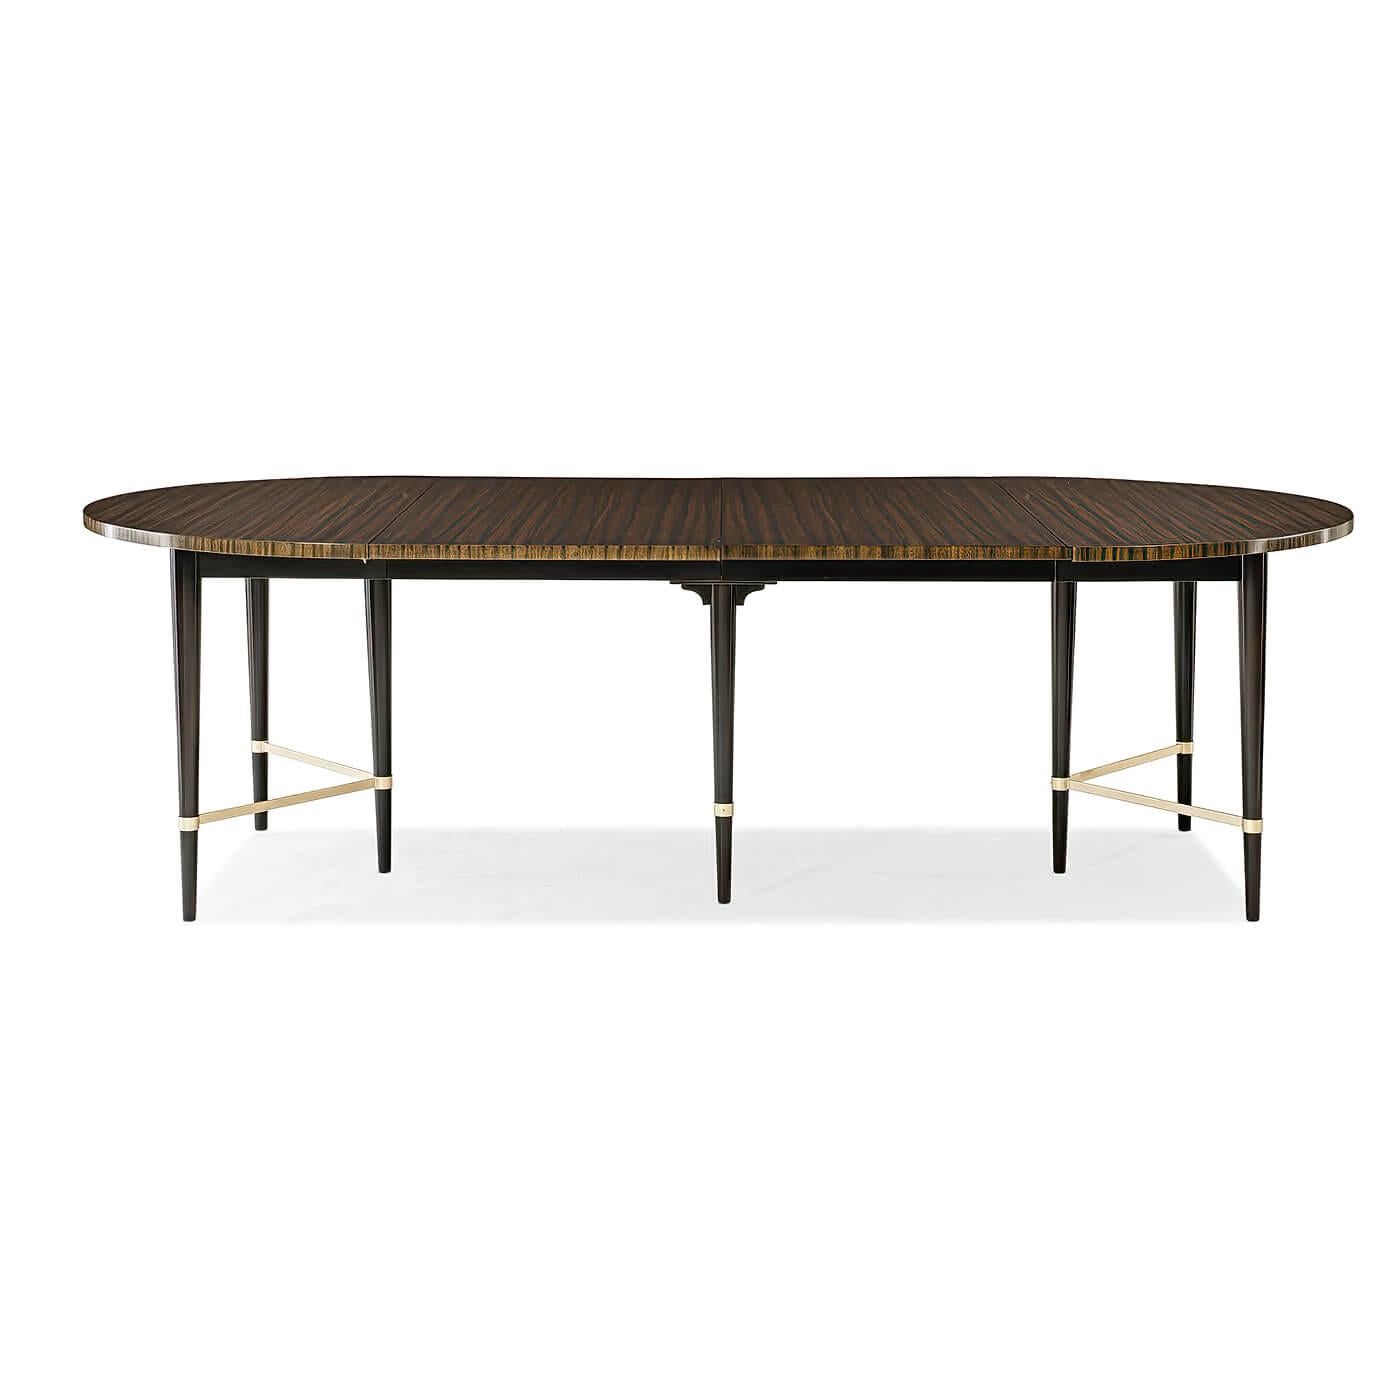 Contemporary Mid-Century Modern Style Extending Dining Table For Sale